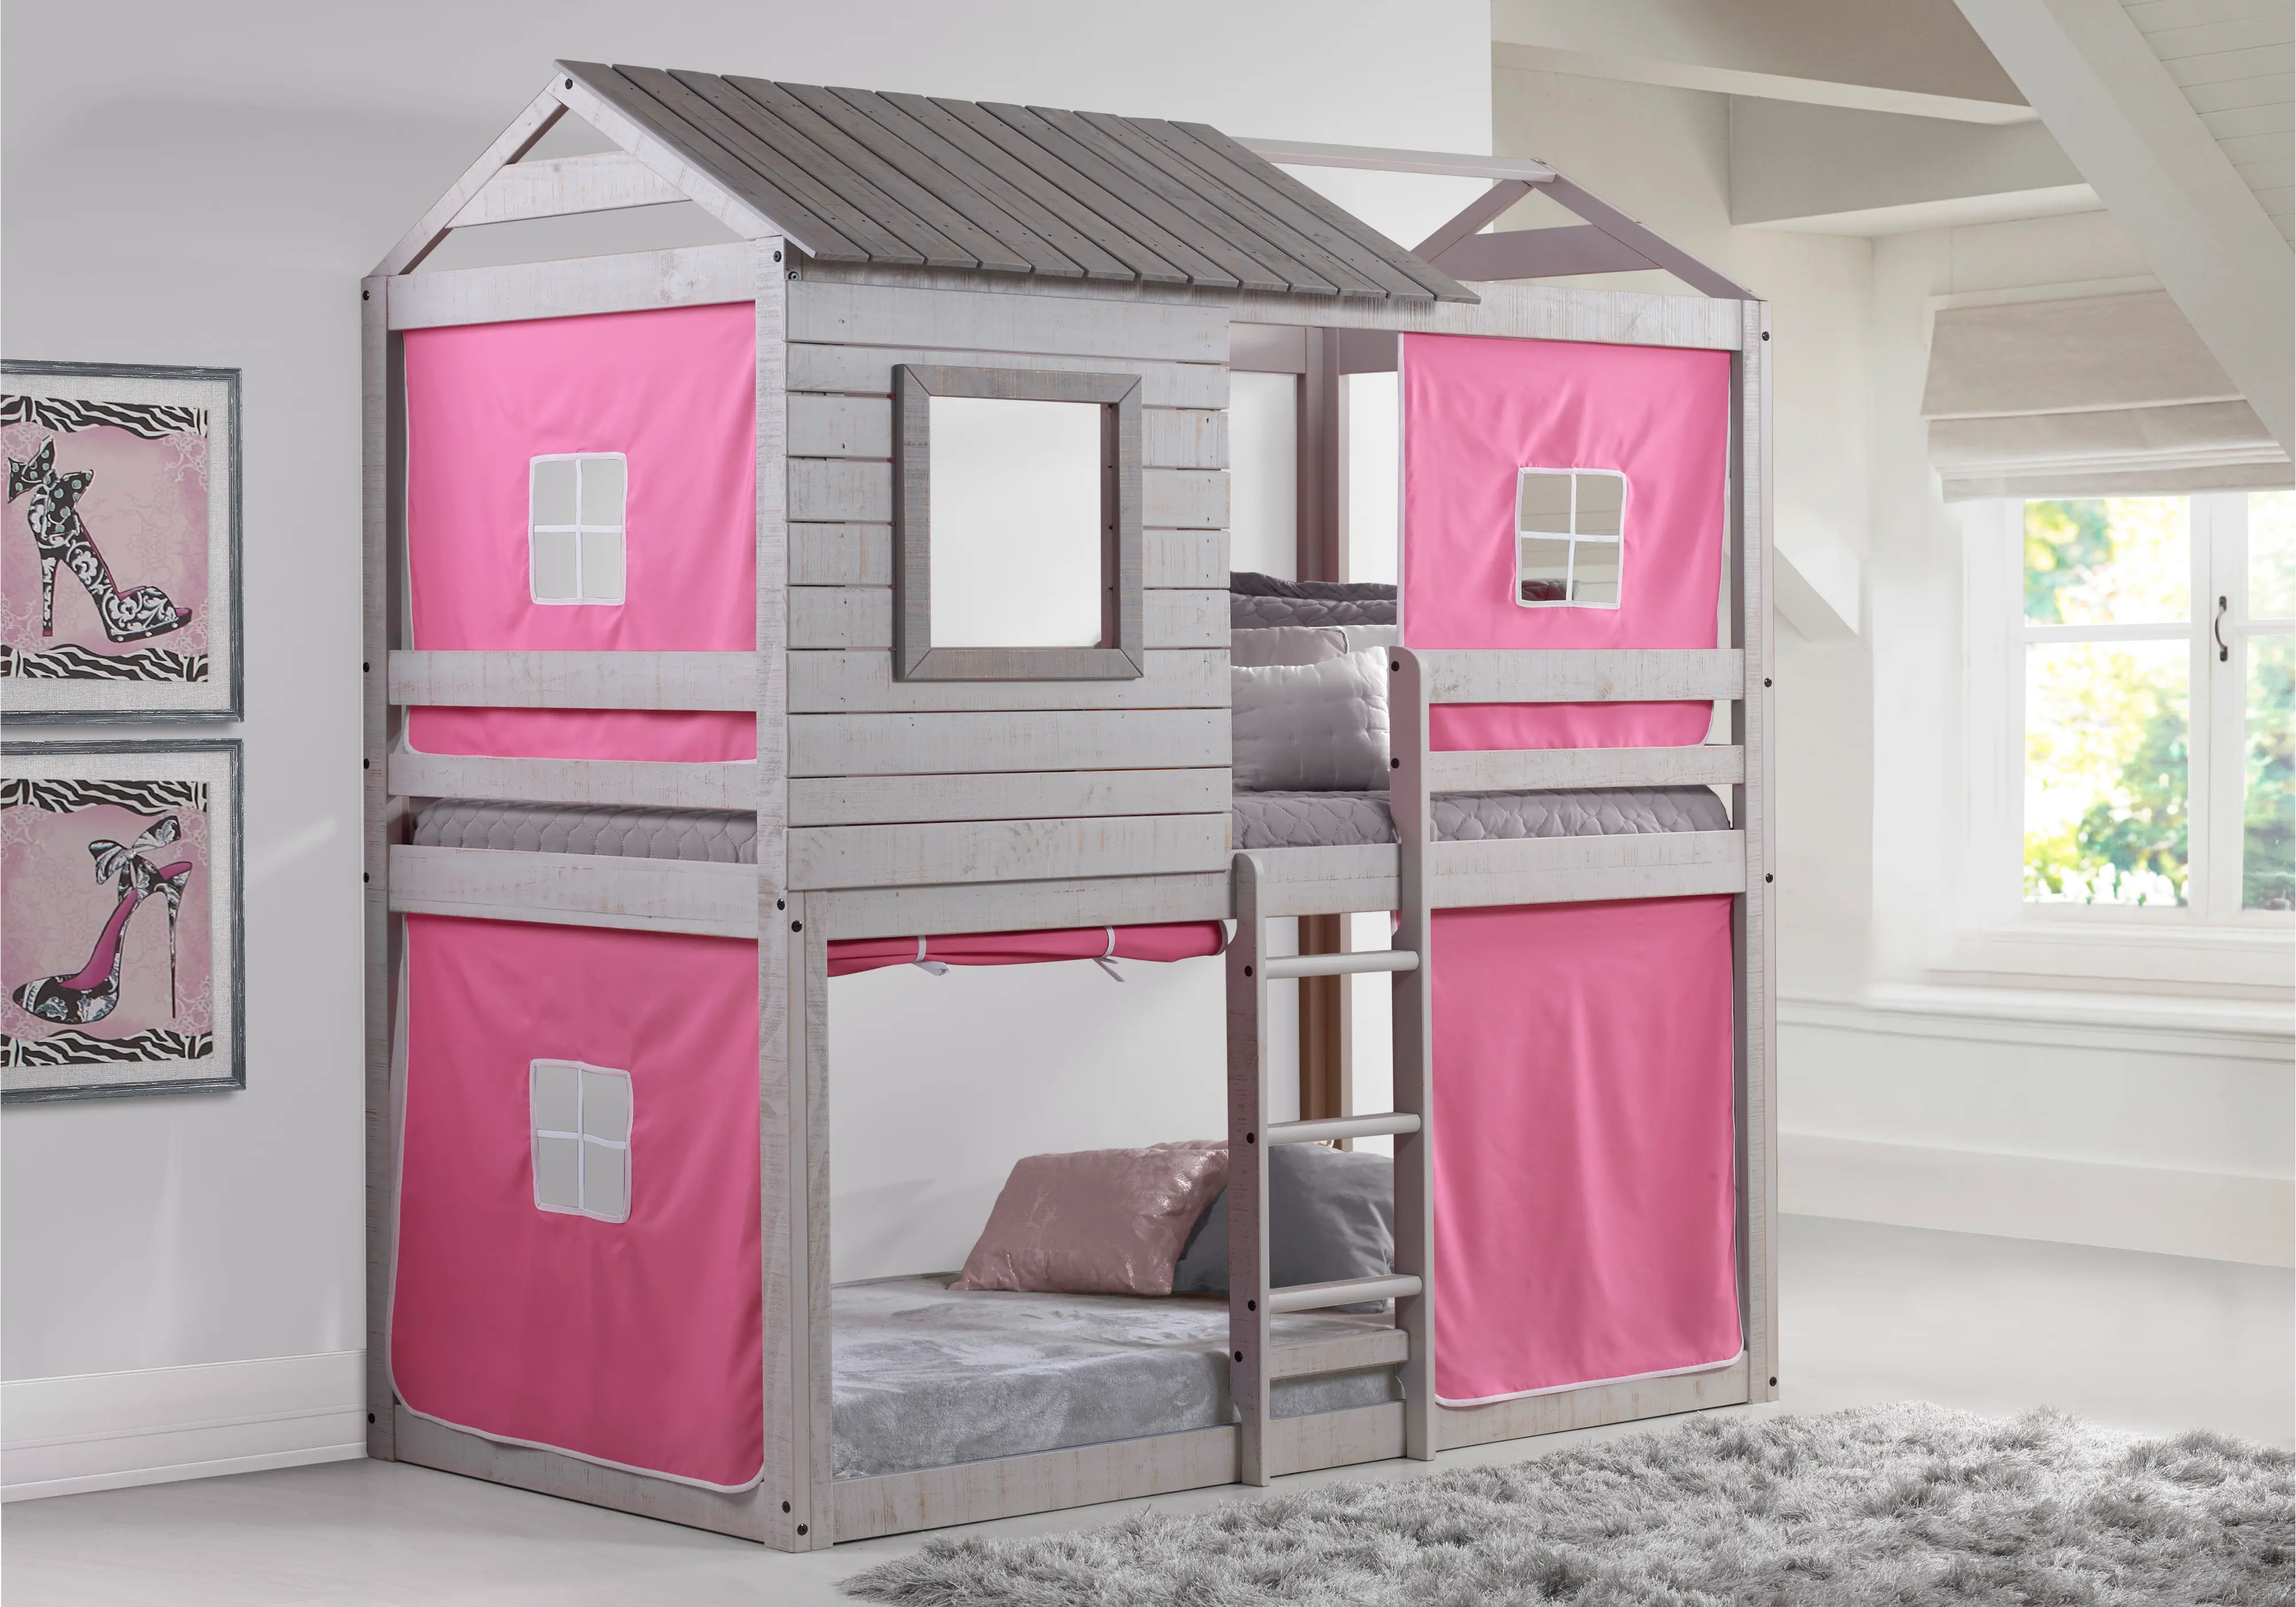 1370-TTLG1370-DP Rustic Gray Twin over Twin Bunk Bed with Pink Tent sku 1370-TTLG1370-DP